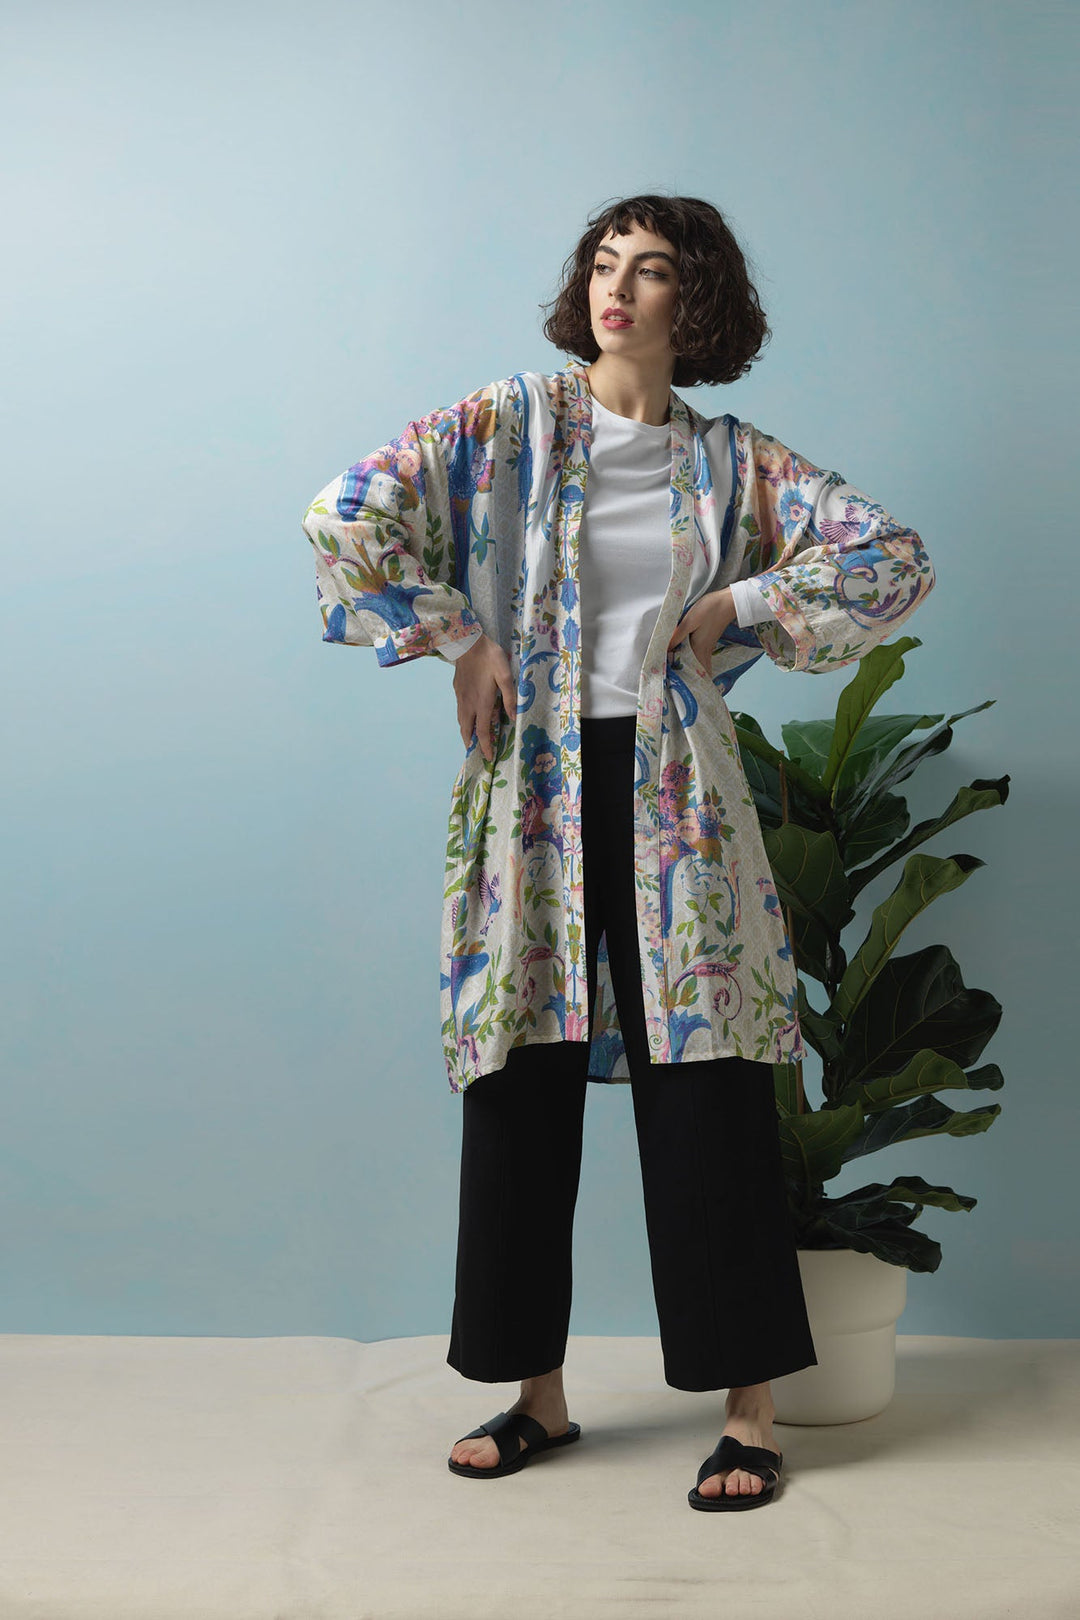 The Opulent Pastel print features a blue and beige intricate pattern with peach and pink flowers. Perfect for wearing with a classic white t-shirt, black trousers and sandals this summer season.  